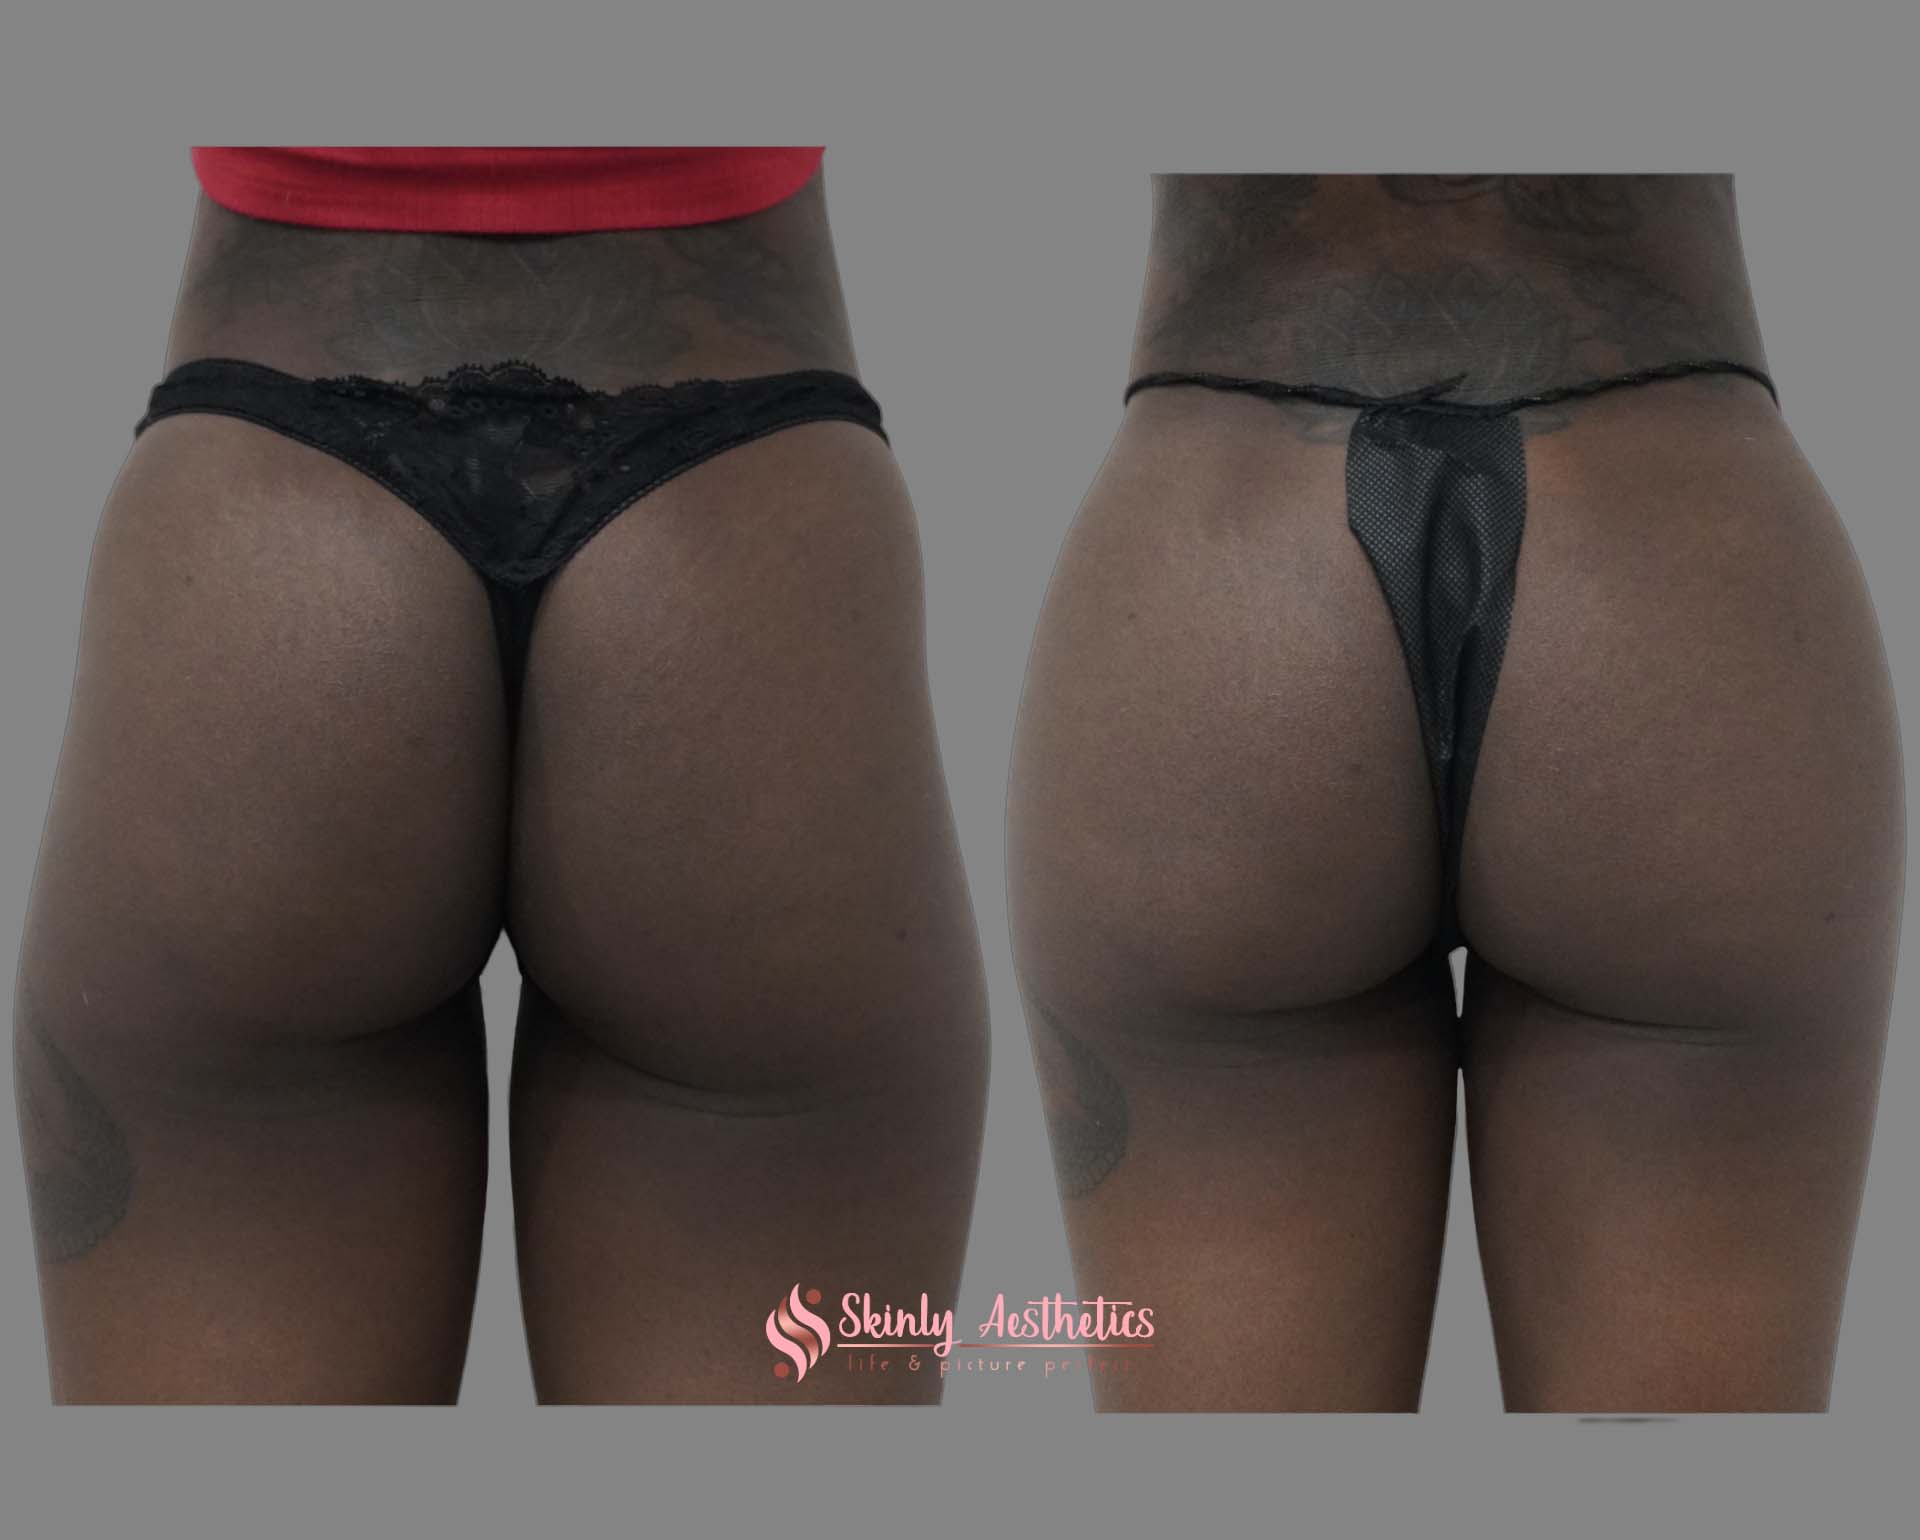 before and after results following 16 vials of Sculptra butt lift filler injections